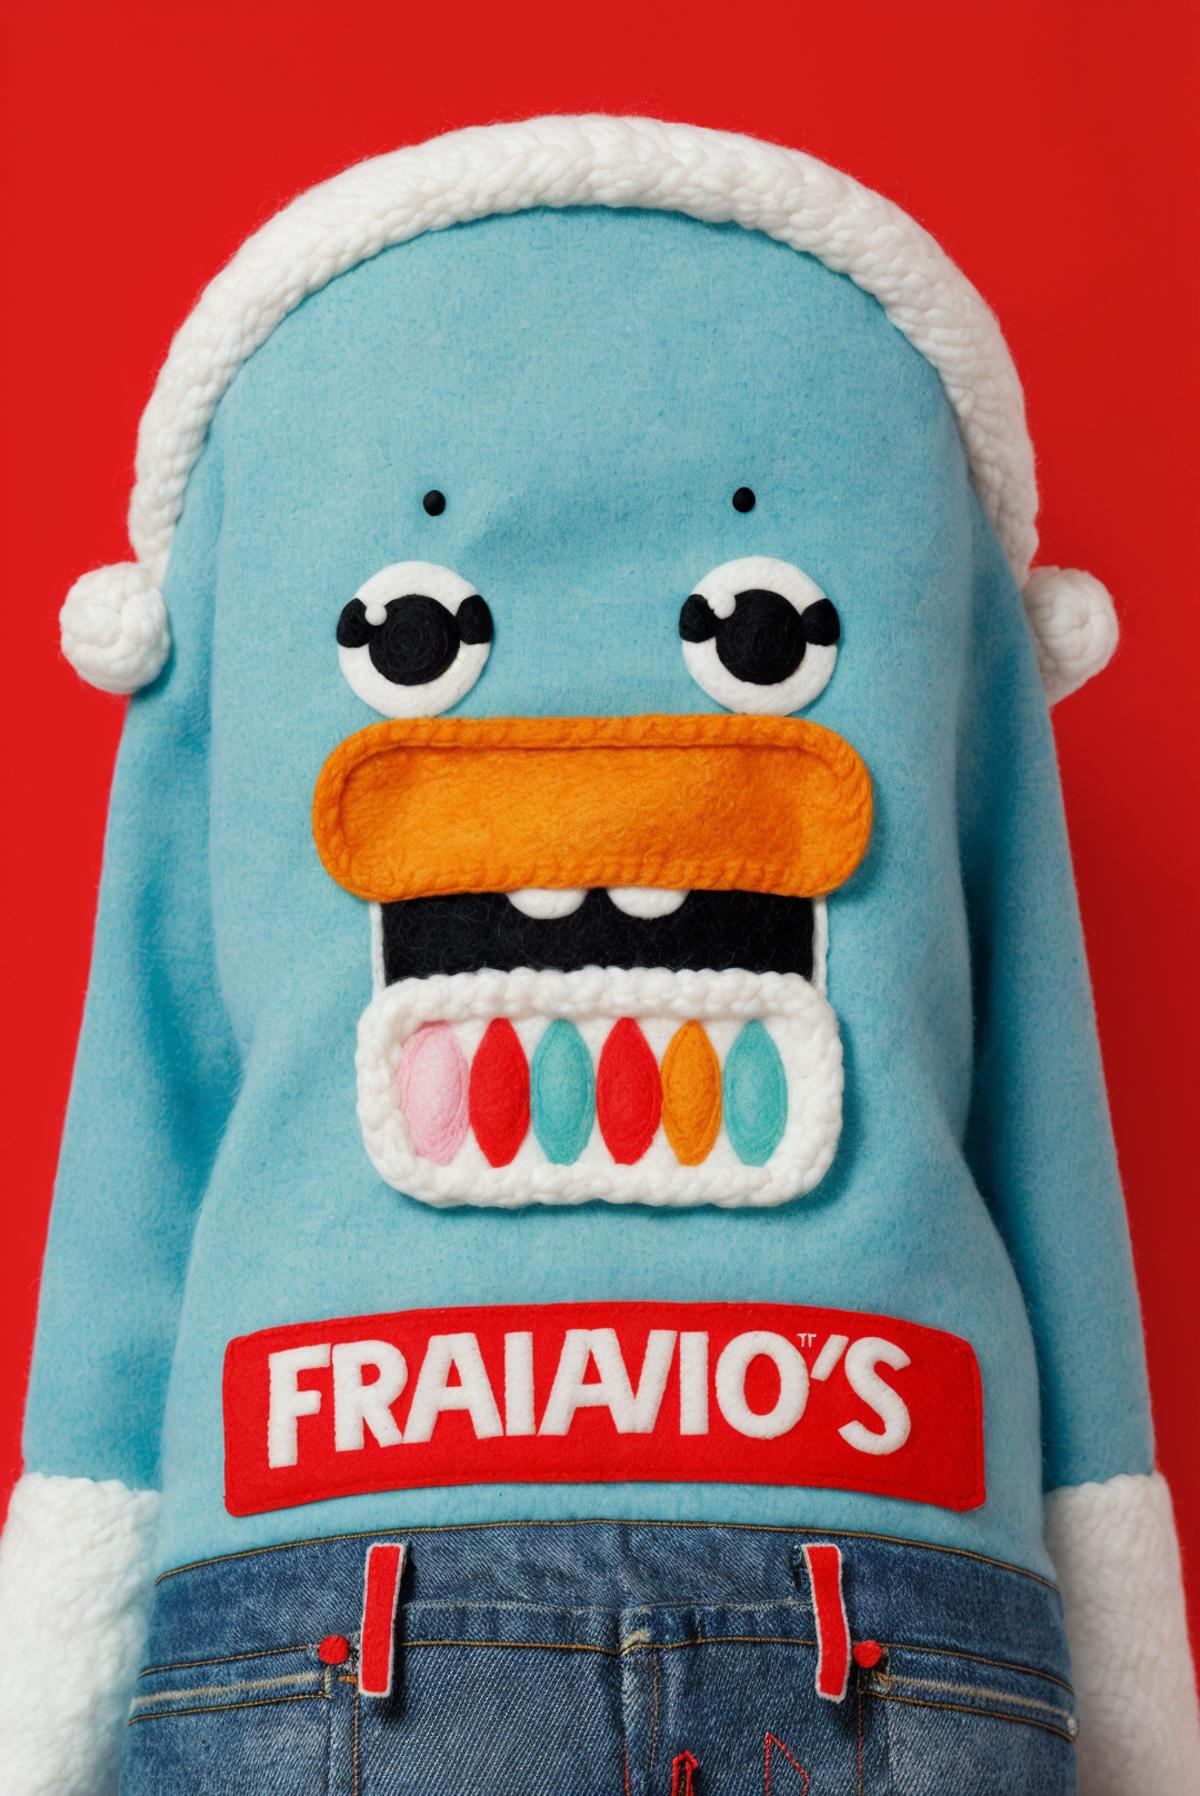 A stuffed toy, possibly a blue puppet, with a mouth made of candy and the word "Fraviagos" on the front.